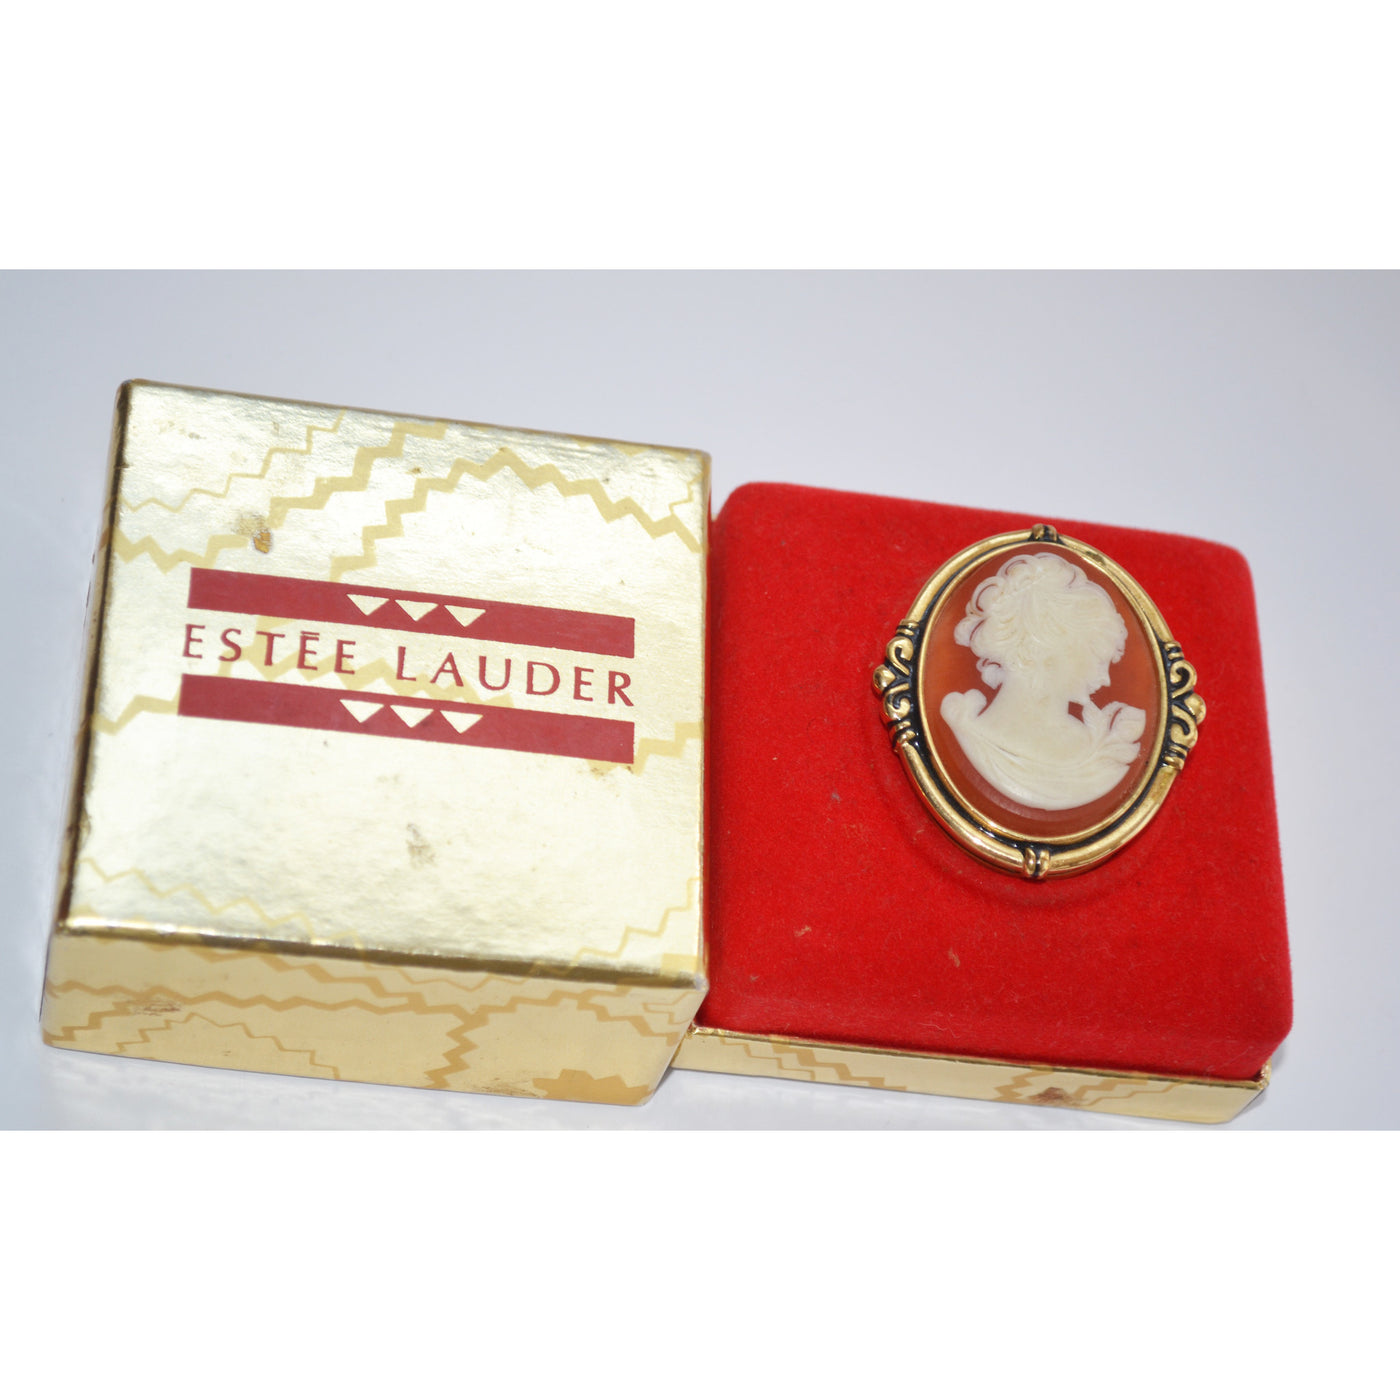 Vintage Youth Dew Perfume Compact By Estee Lauder 